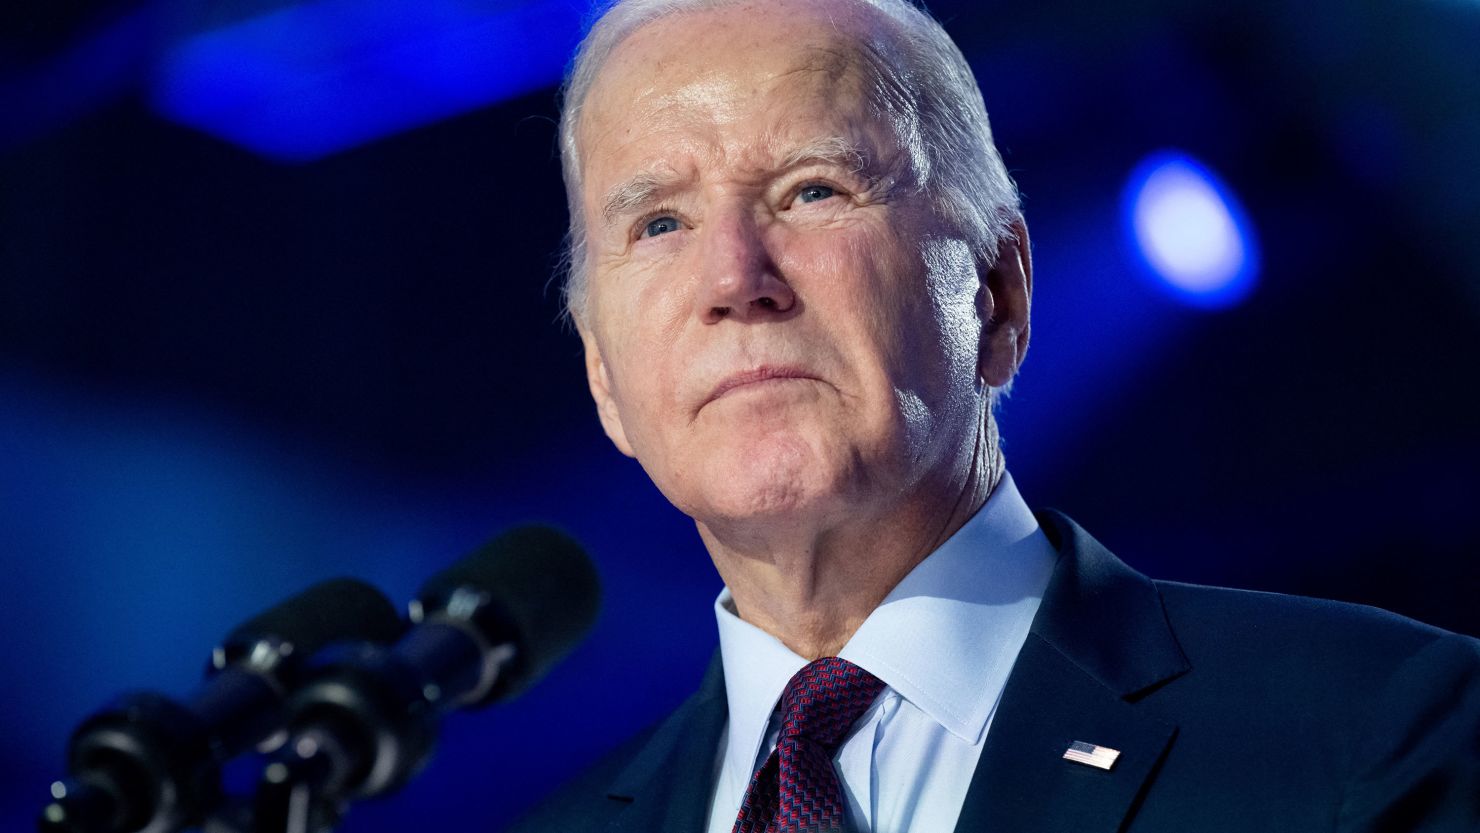 Biden lawyers wrote to AG Garland objecting to aspects of Hur’s report